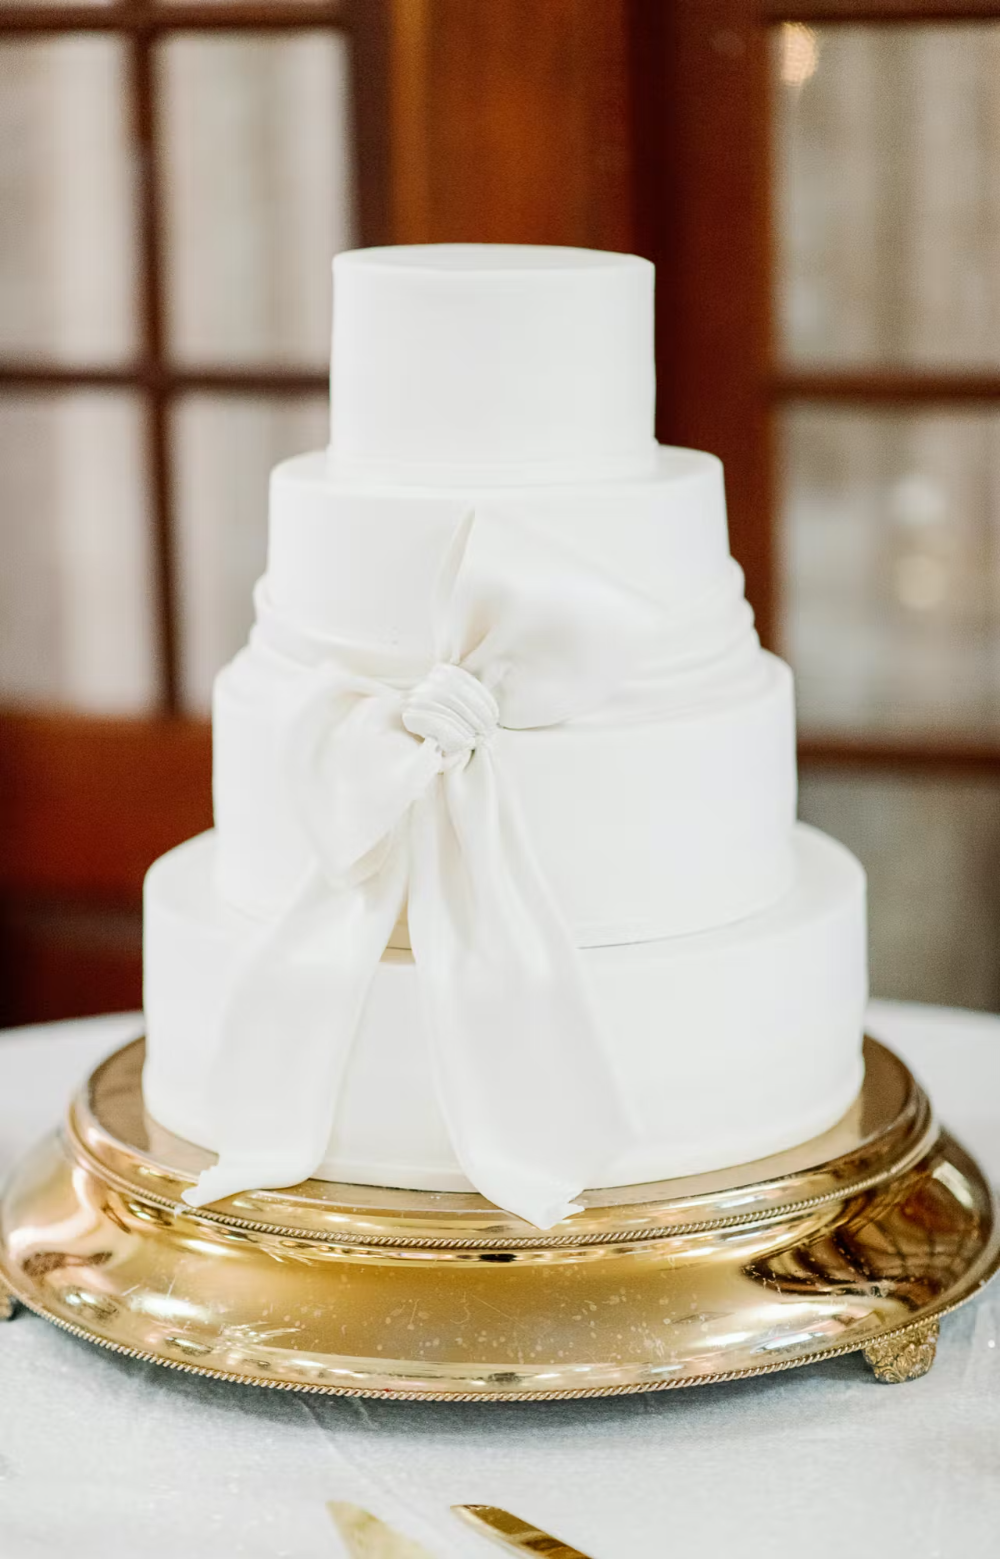 Wedding ideas with the color white: white wedding cake on gold stand